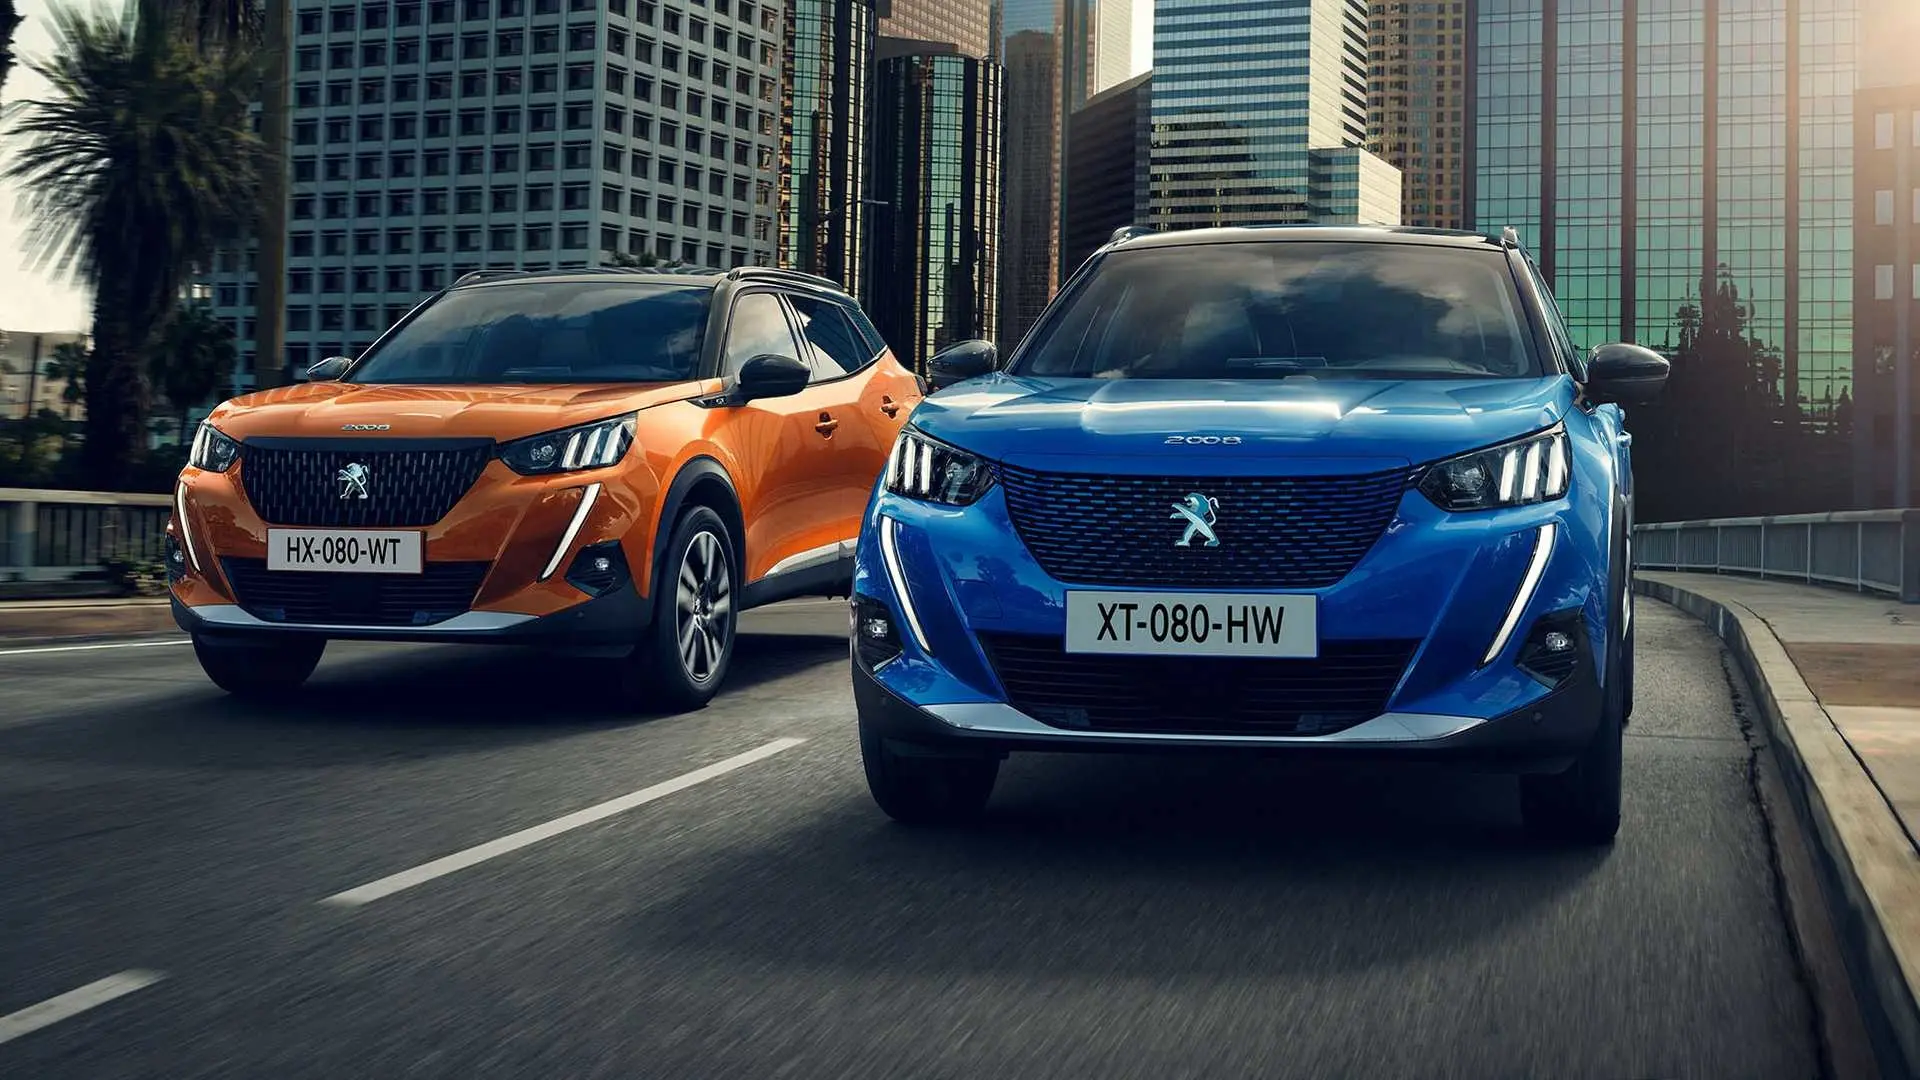 2020 Peugeot 2008 Debuts With Bold SUV Looks And An EV Option